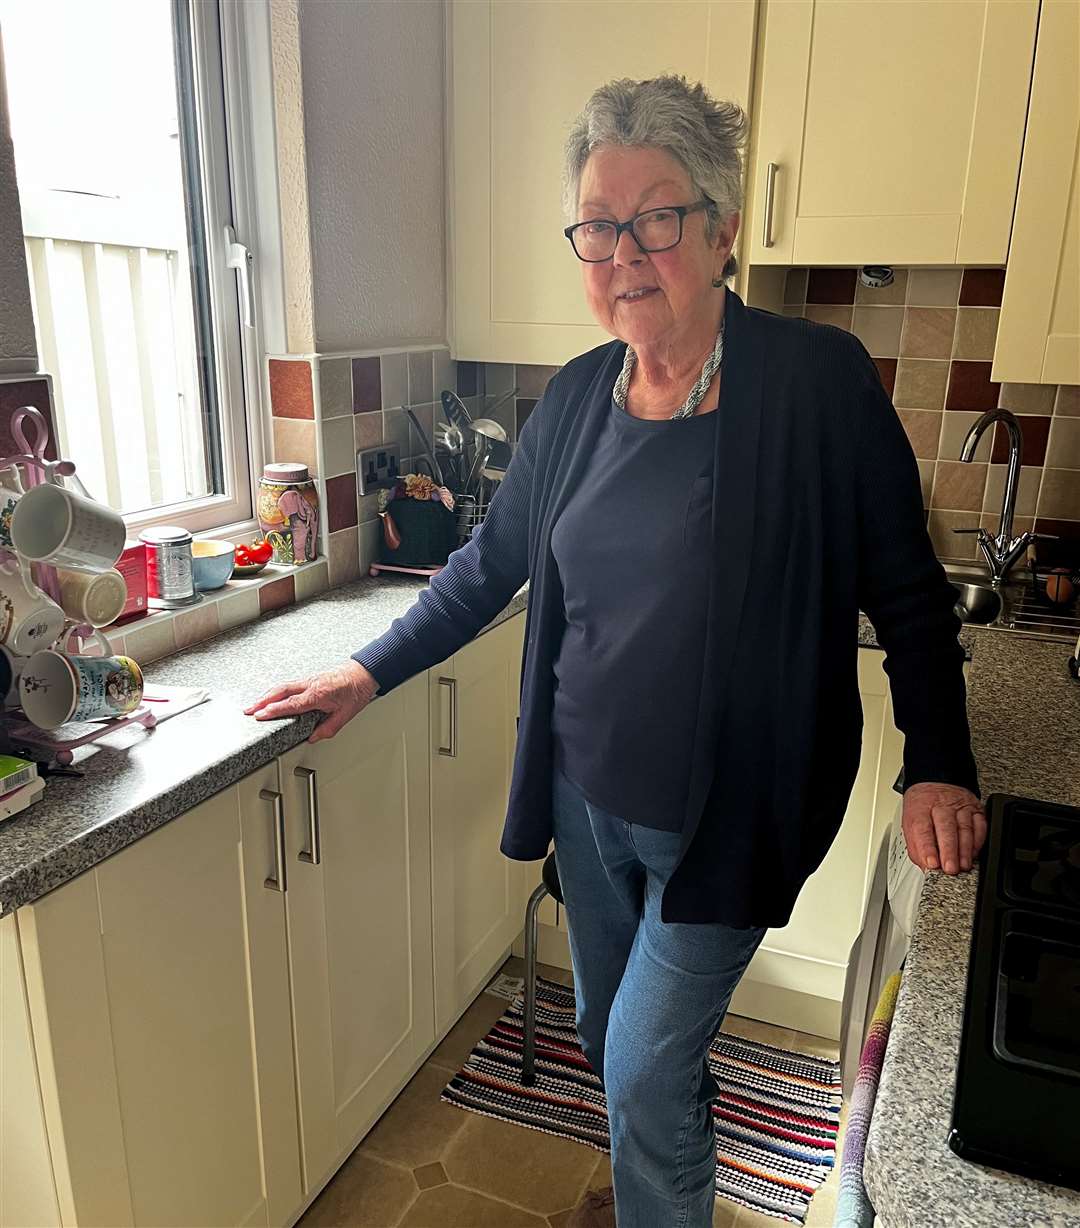 Christine Evans does not want to lose a kitchen cupboard for her water meter to be installed